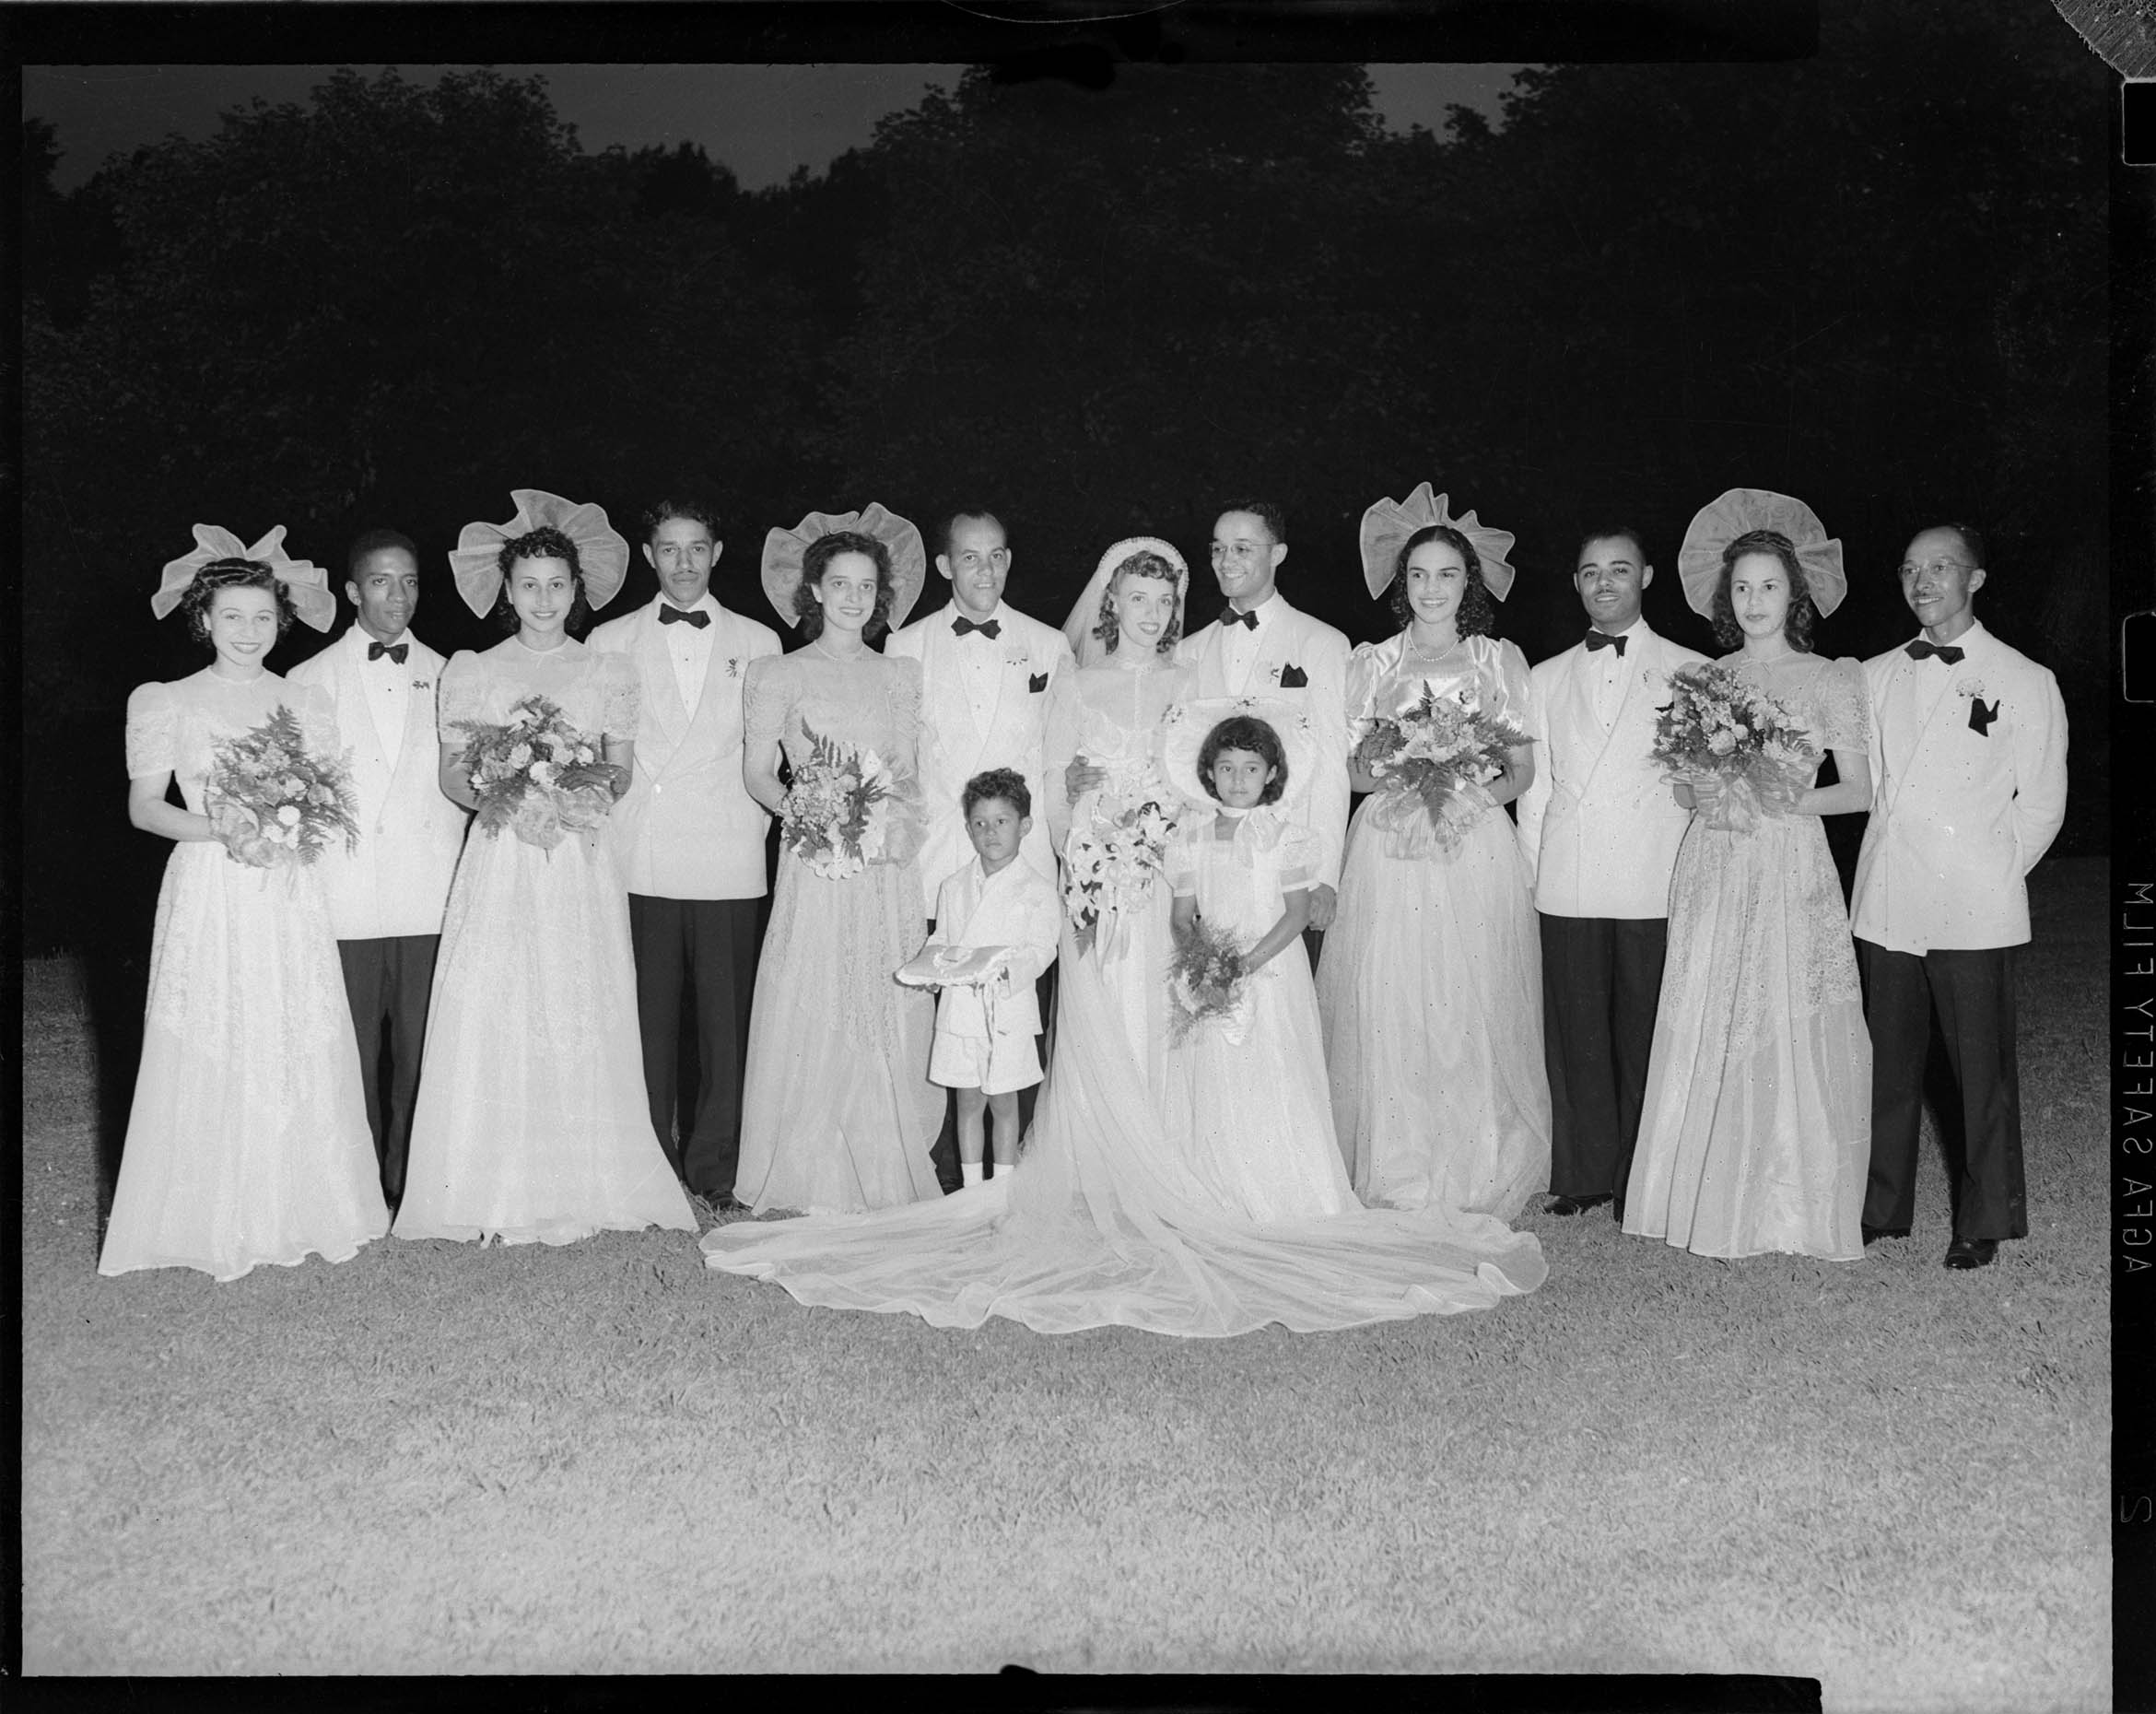 Charles Teenie Harris, Group portrait of wedding party, posed in yard possibly on Chalfont Street, July 25, 1942, Heinz Family Fund